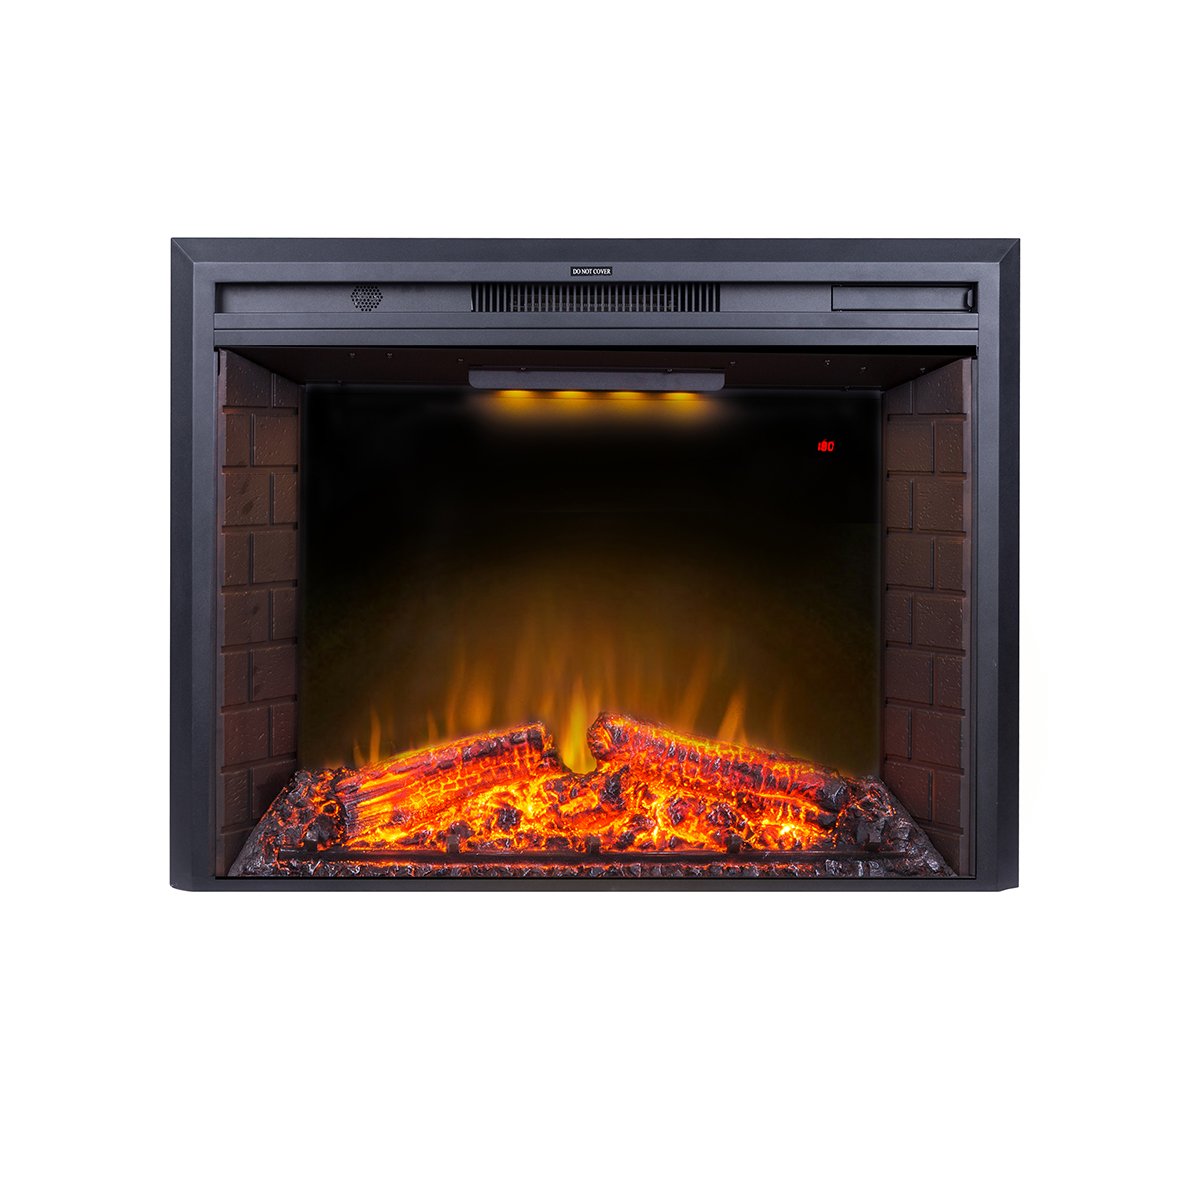 33 Inches Electric Fireplace Insert, Fireplace Heater with Overheating Protection, Black-CASAINC